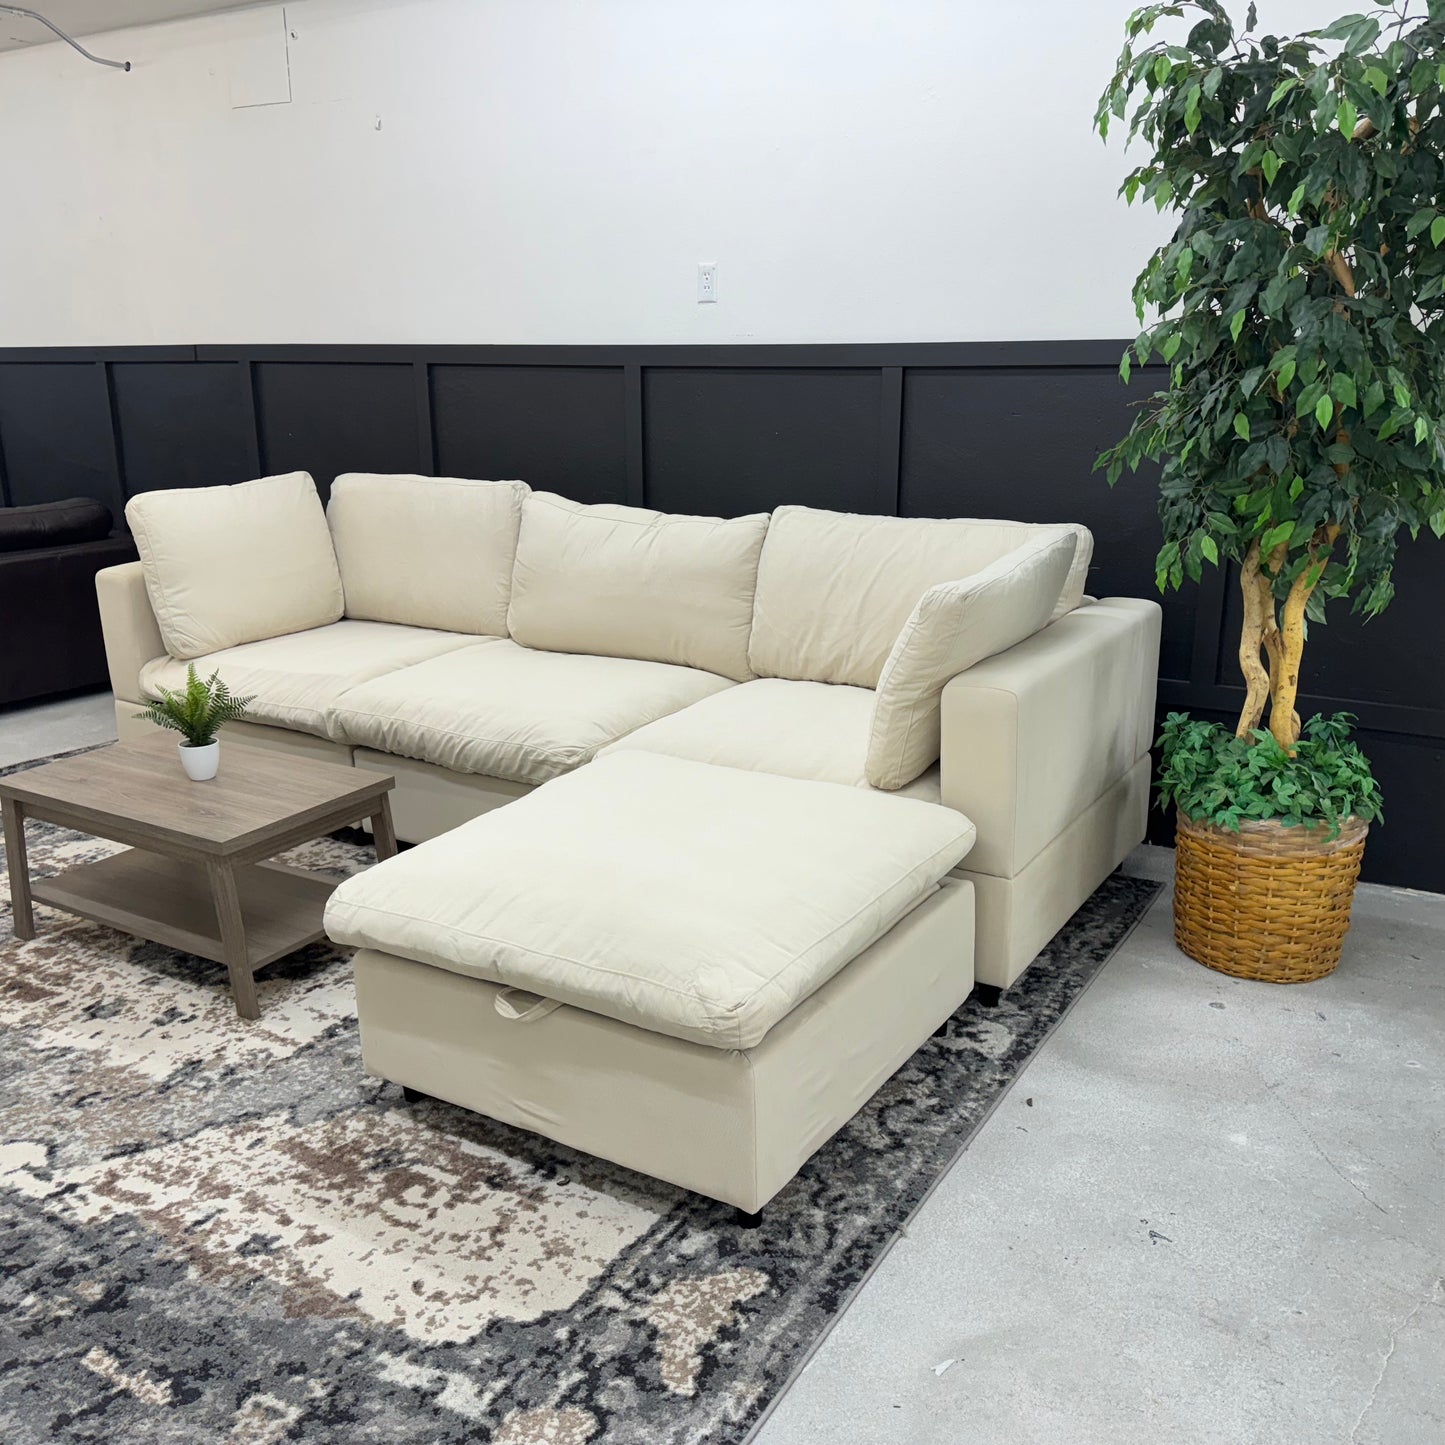 BRAND NEW Beige Modular Cloud Sectional Couch